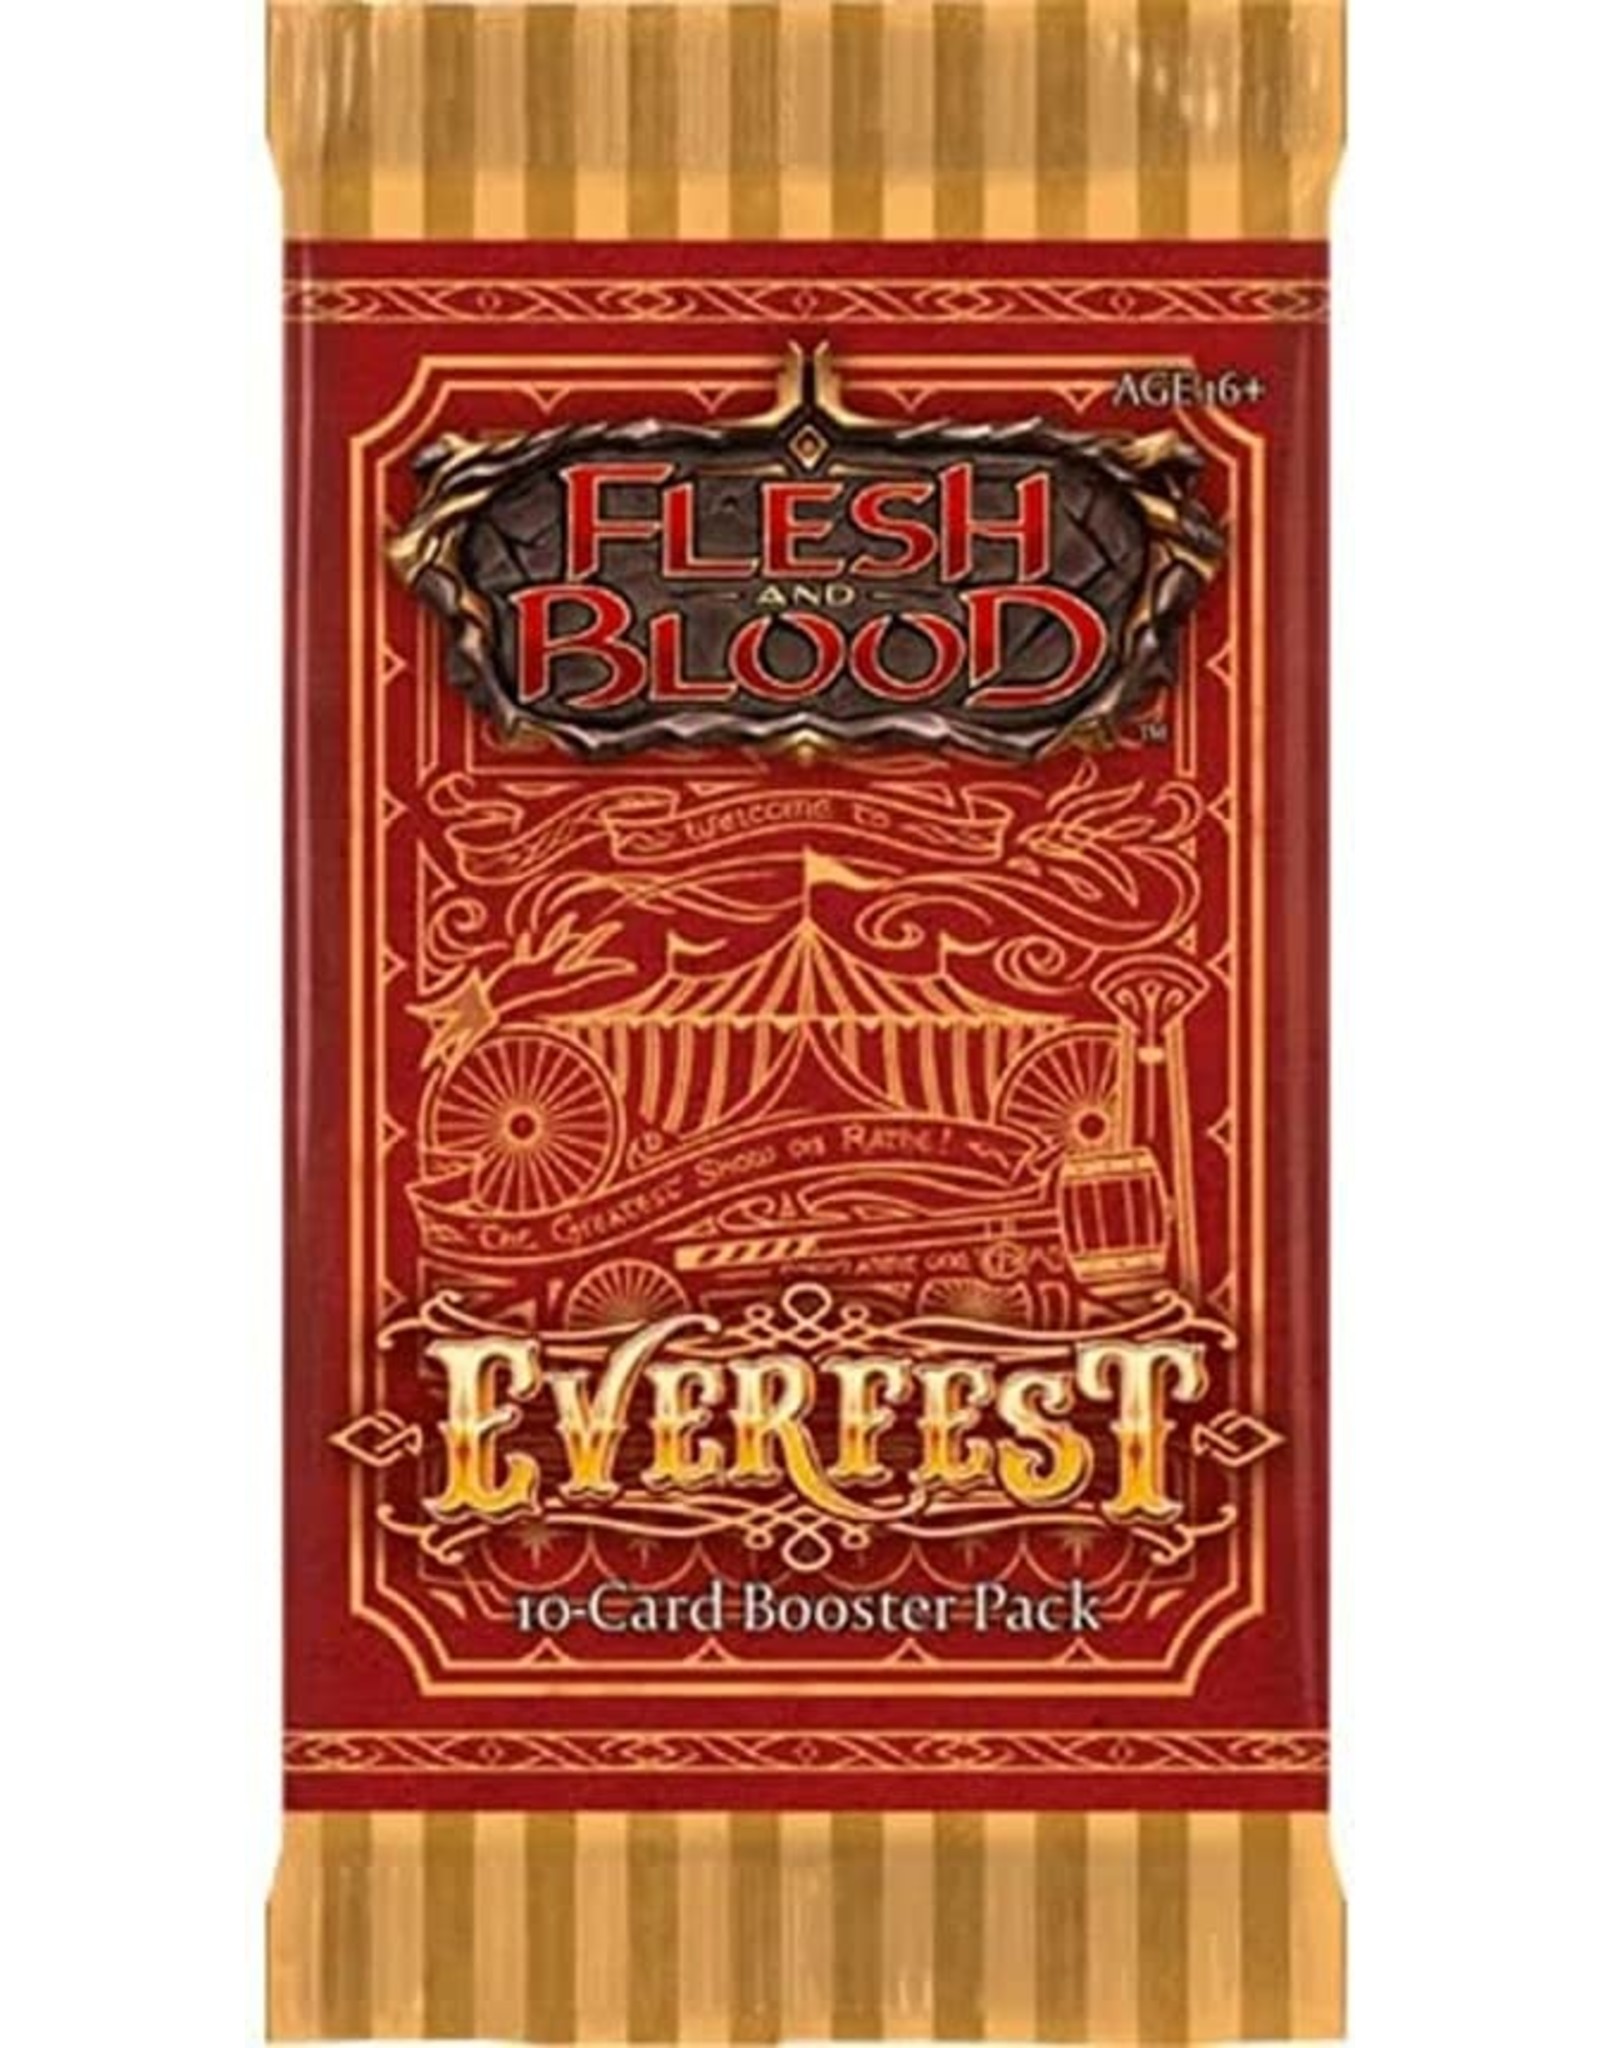 Legend Story Studios Flesh and Blood TCG: Everfest (1st Edition) BOOSTER